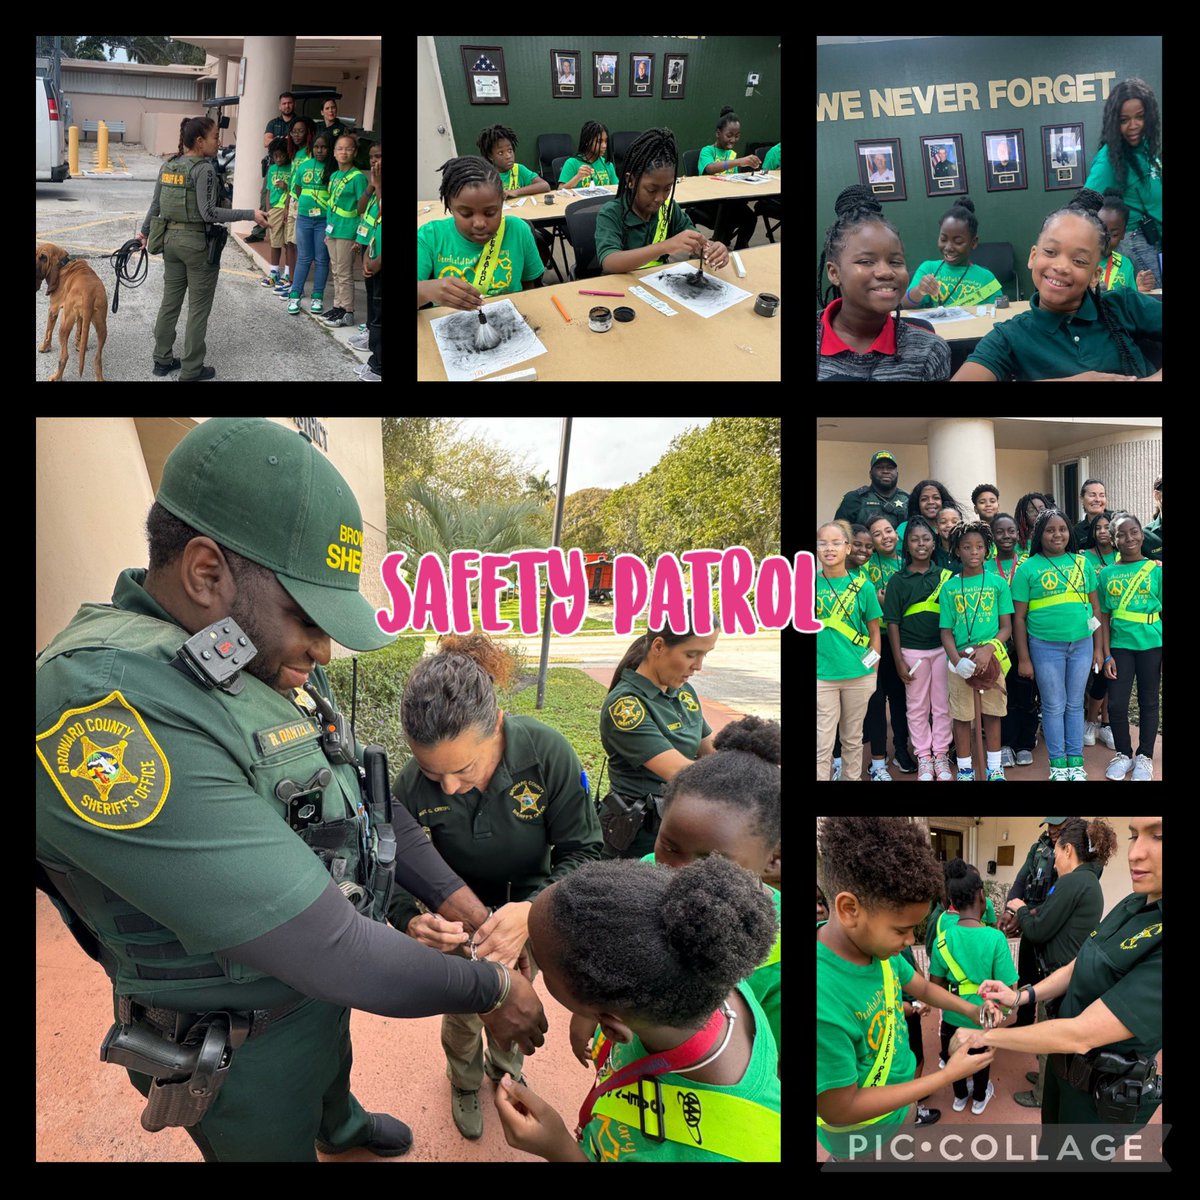 Our safety patrol enjoyed their visit to BSO headquarters. At DPE we have the responsibility to expose scholars to various careers. @PrincipalDarby1 @MPerezDir